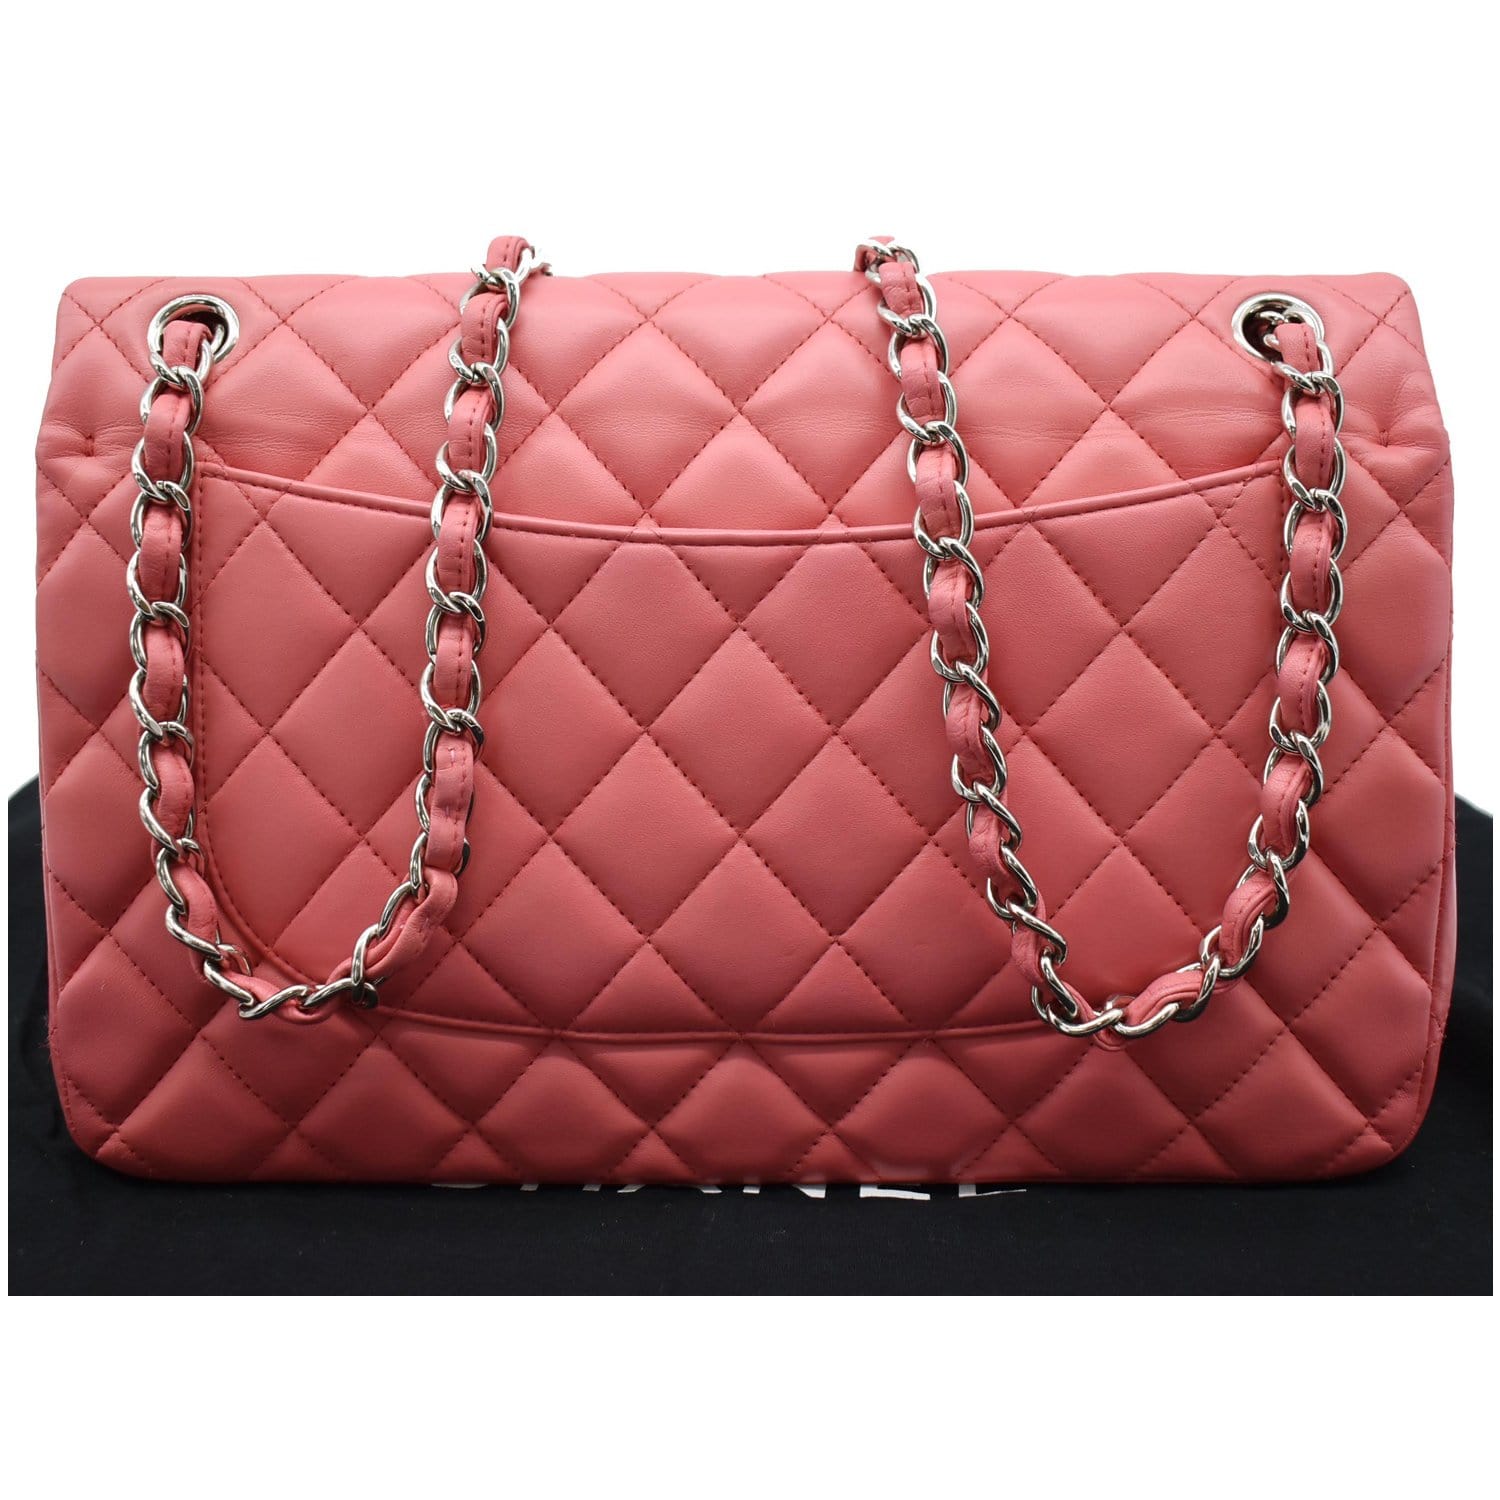 Chanel Pre-owned Jumbo terry-cloth Flap Shoulder Bag - Pink